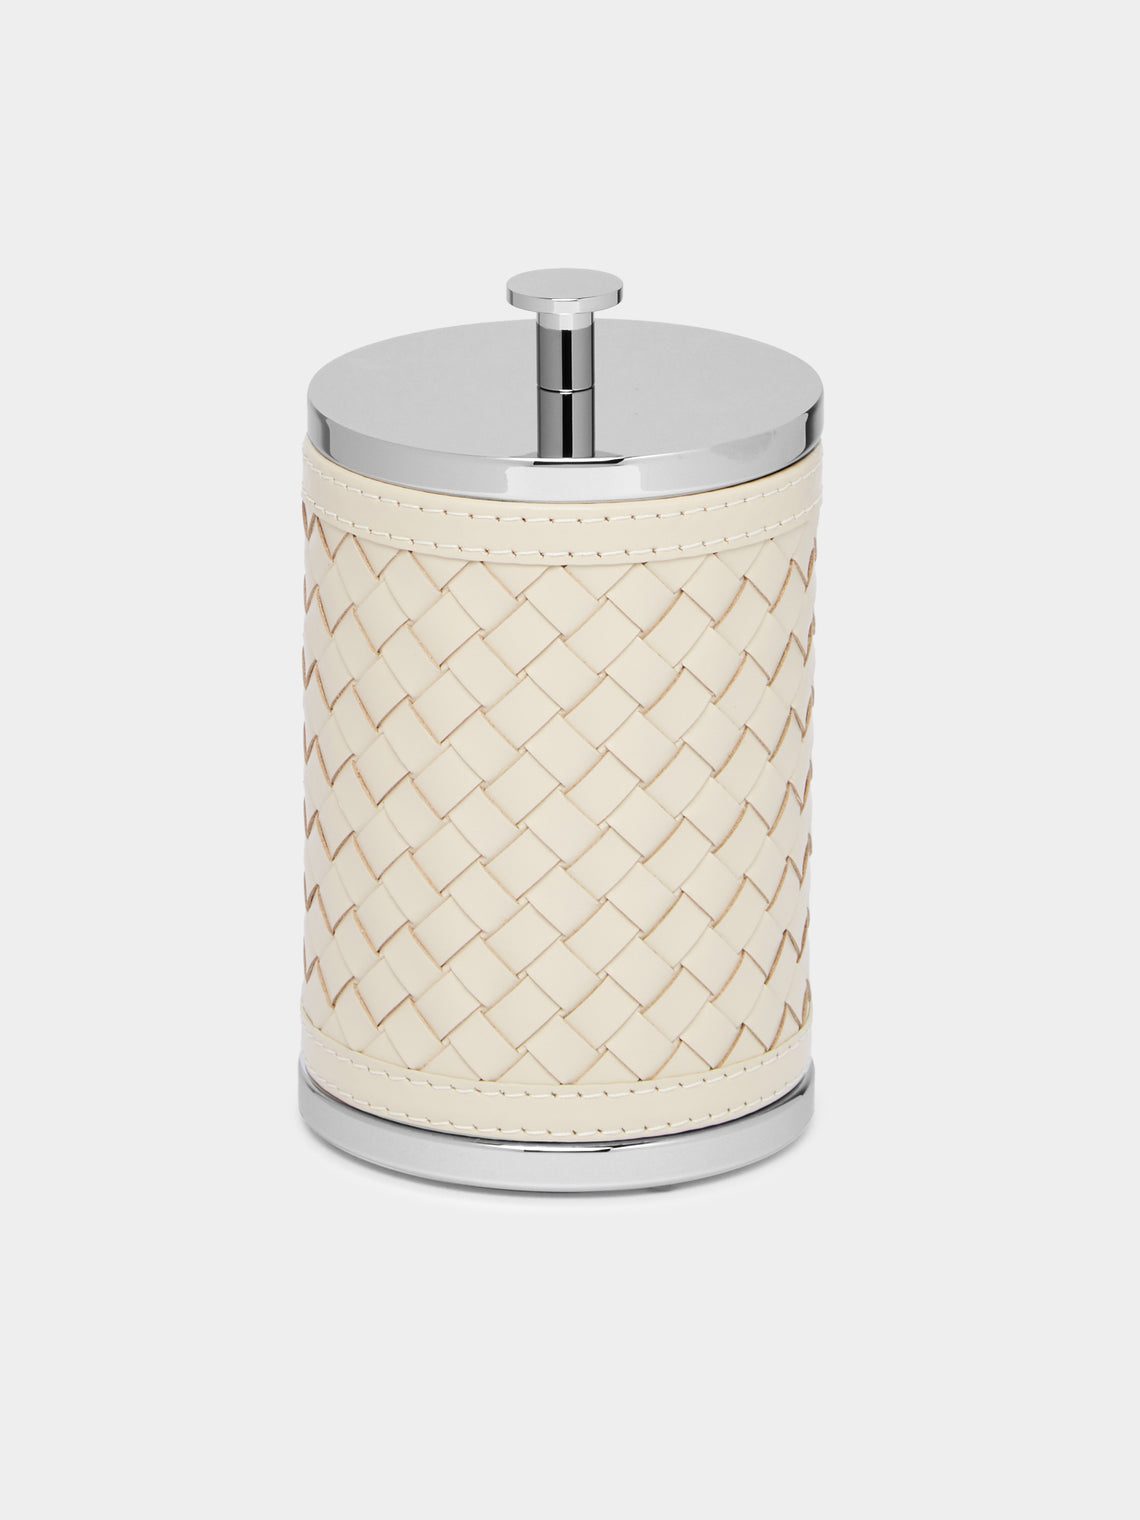 Riviere - Woven Leather Lidded Box -  - ABASK - 